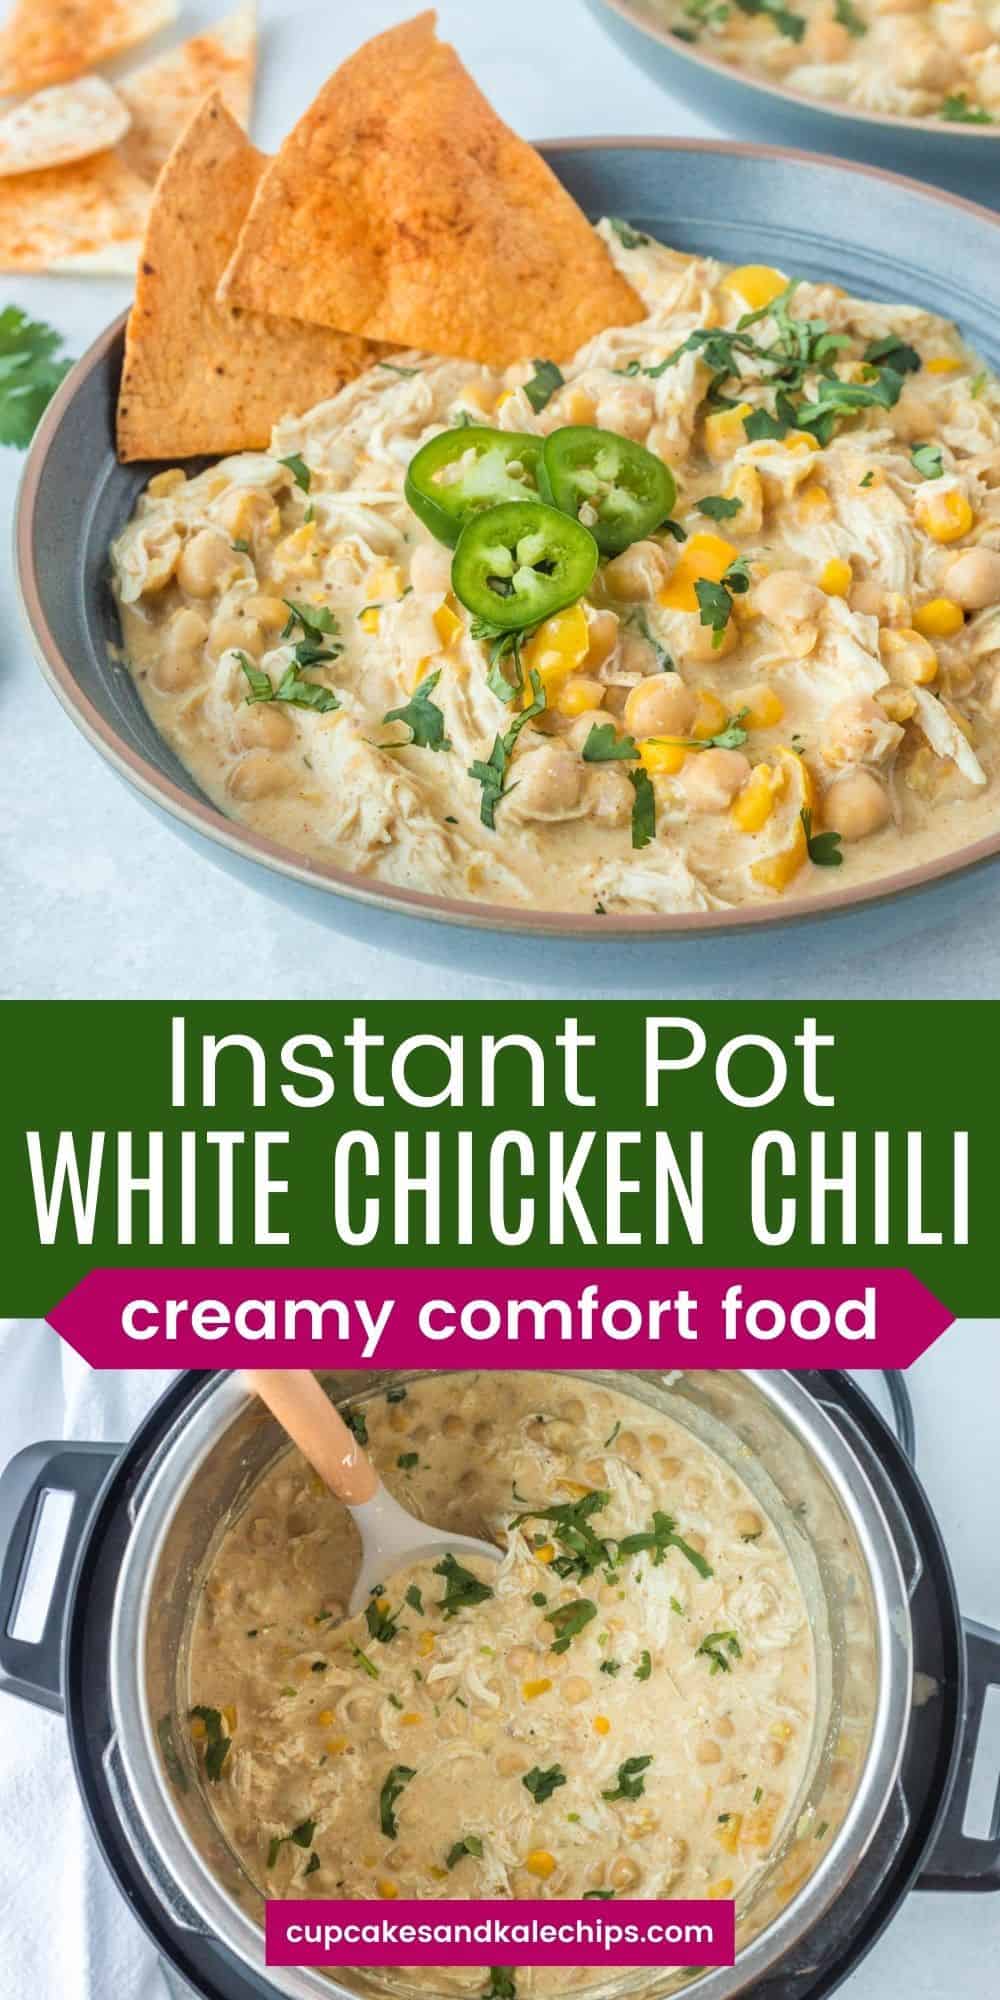 Instant Pot White Bean Chicken Chili | Cupcakes & Kale Chips